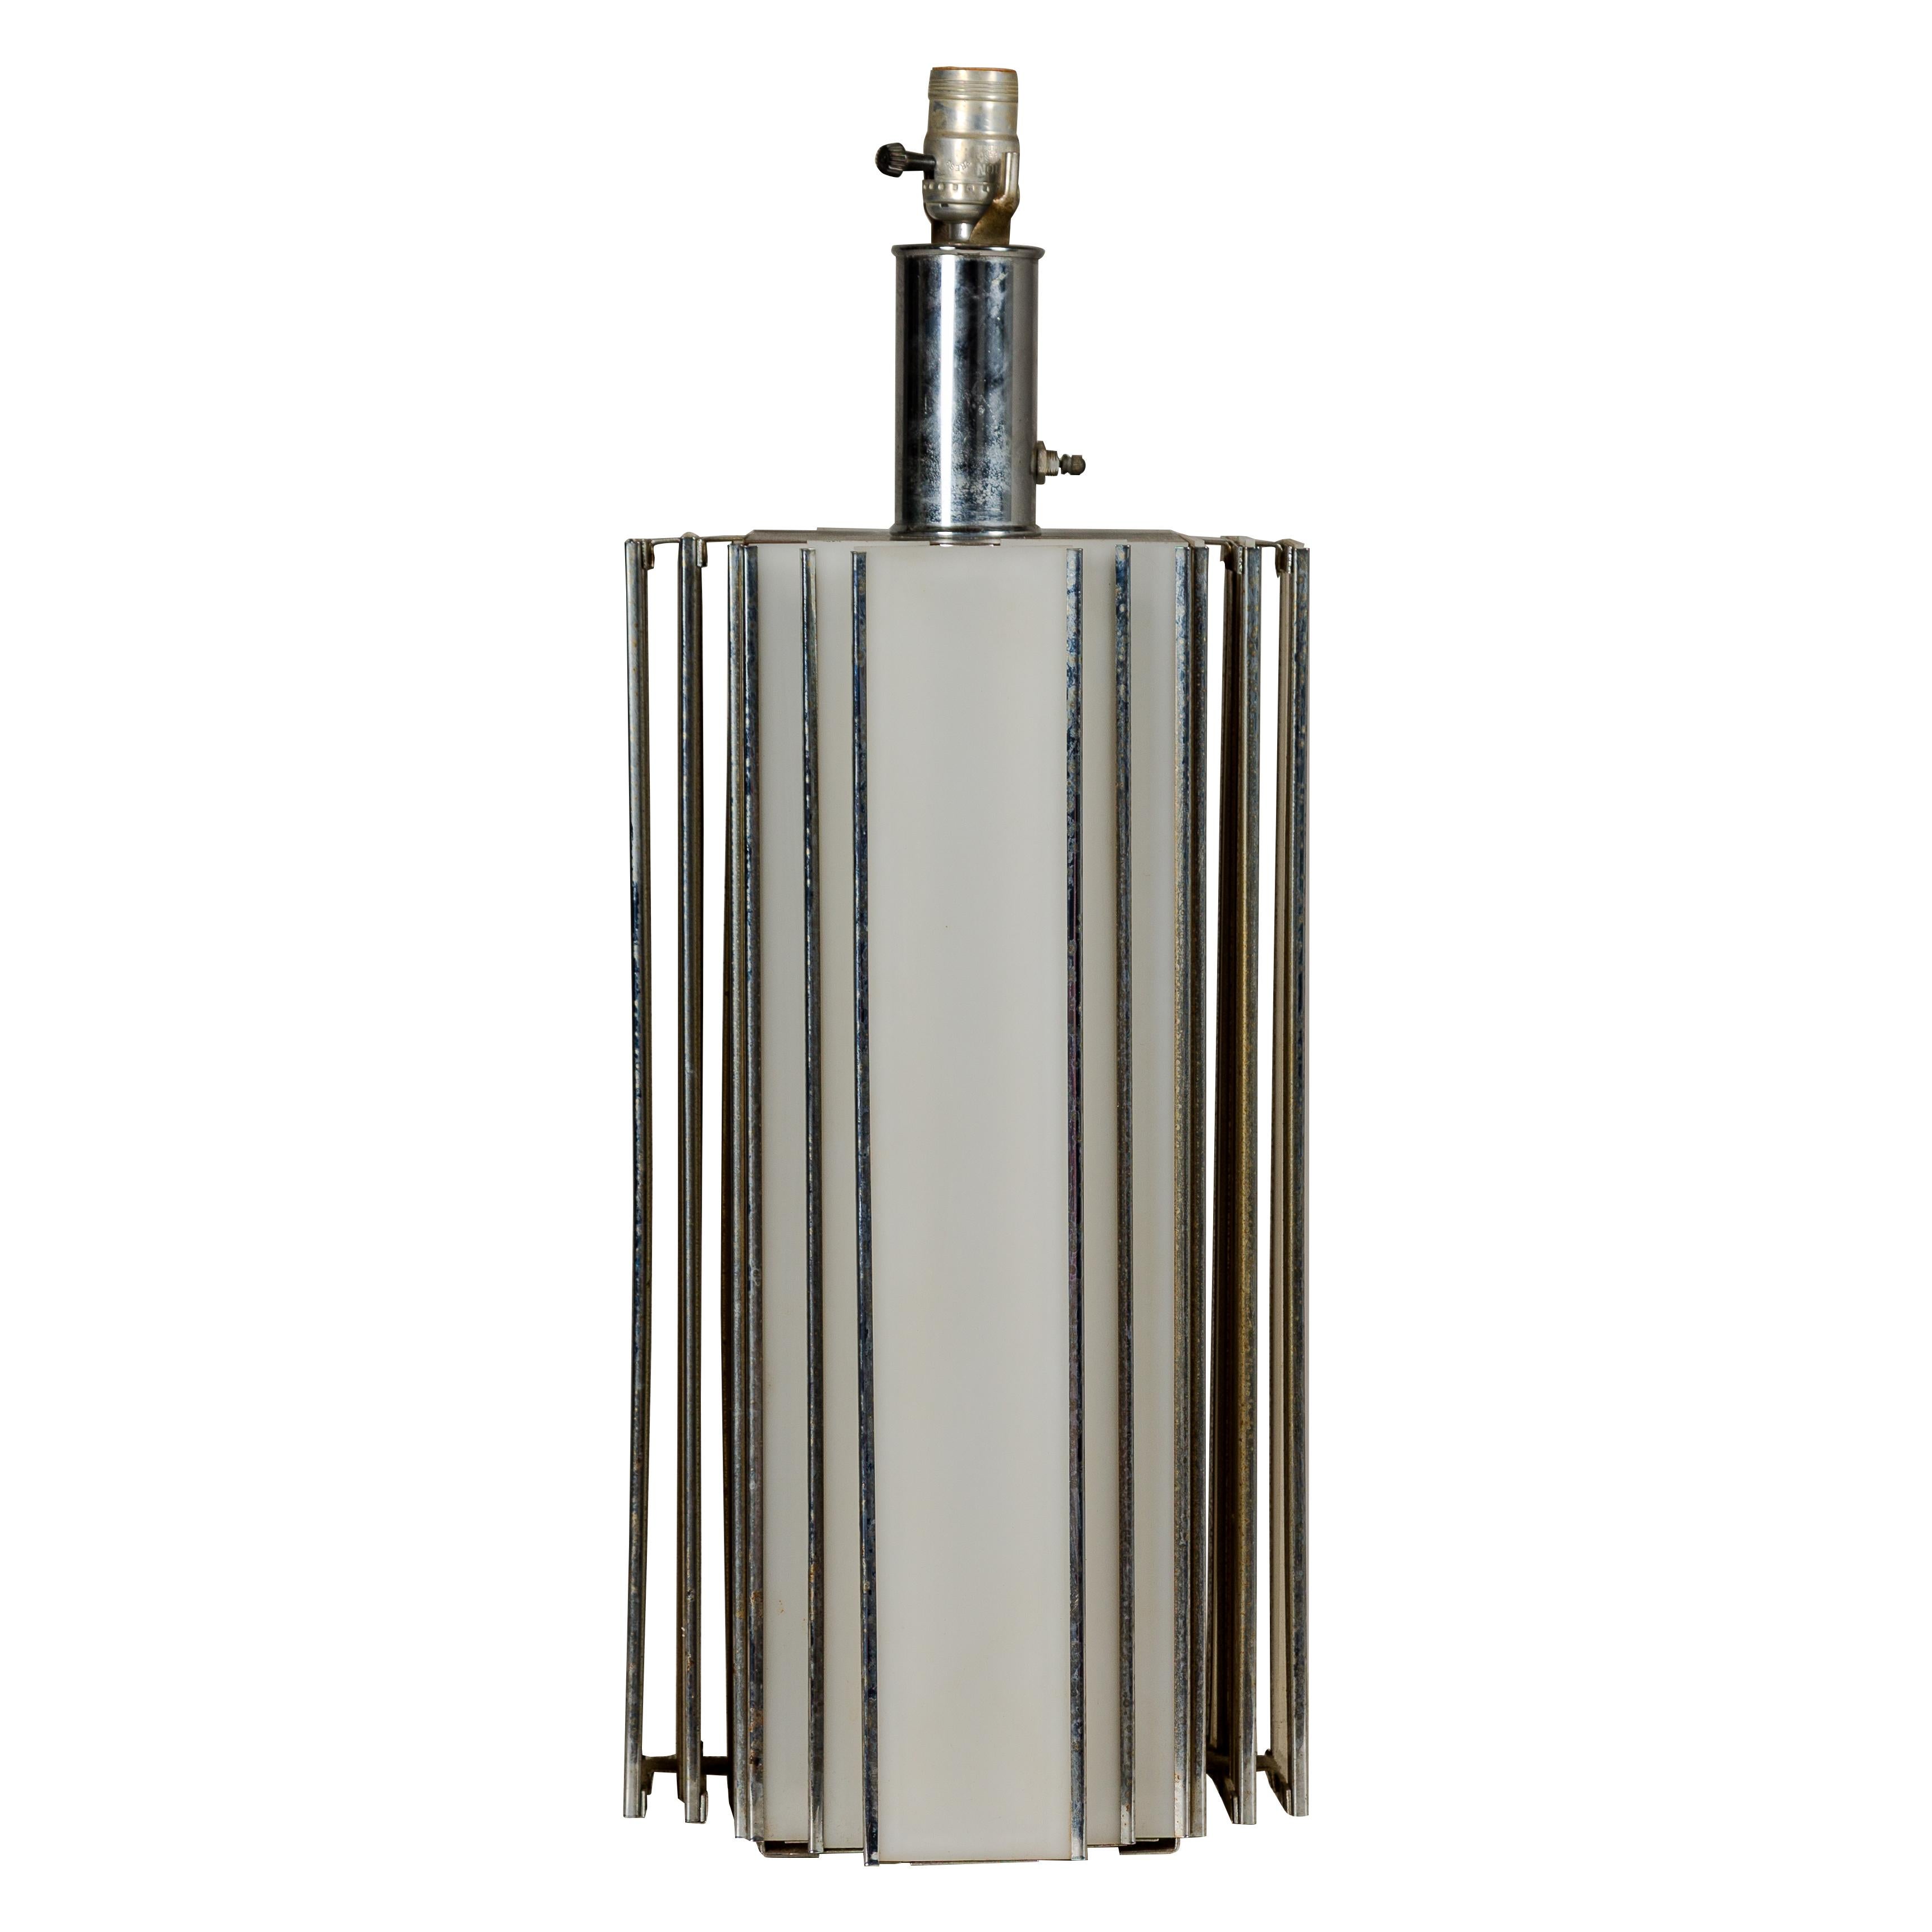 An Art Deco style skyscraper table lamp from the Midcentury period with two lights. Envelop your home in the captivating allure of the Midcentury era with this exquisite Art Deco style skyscraper table lamp. Its sleek, geometric form, reminiscent of